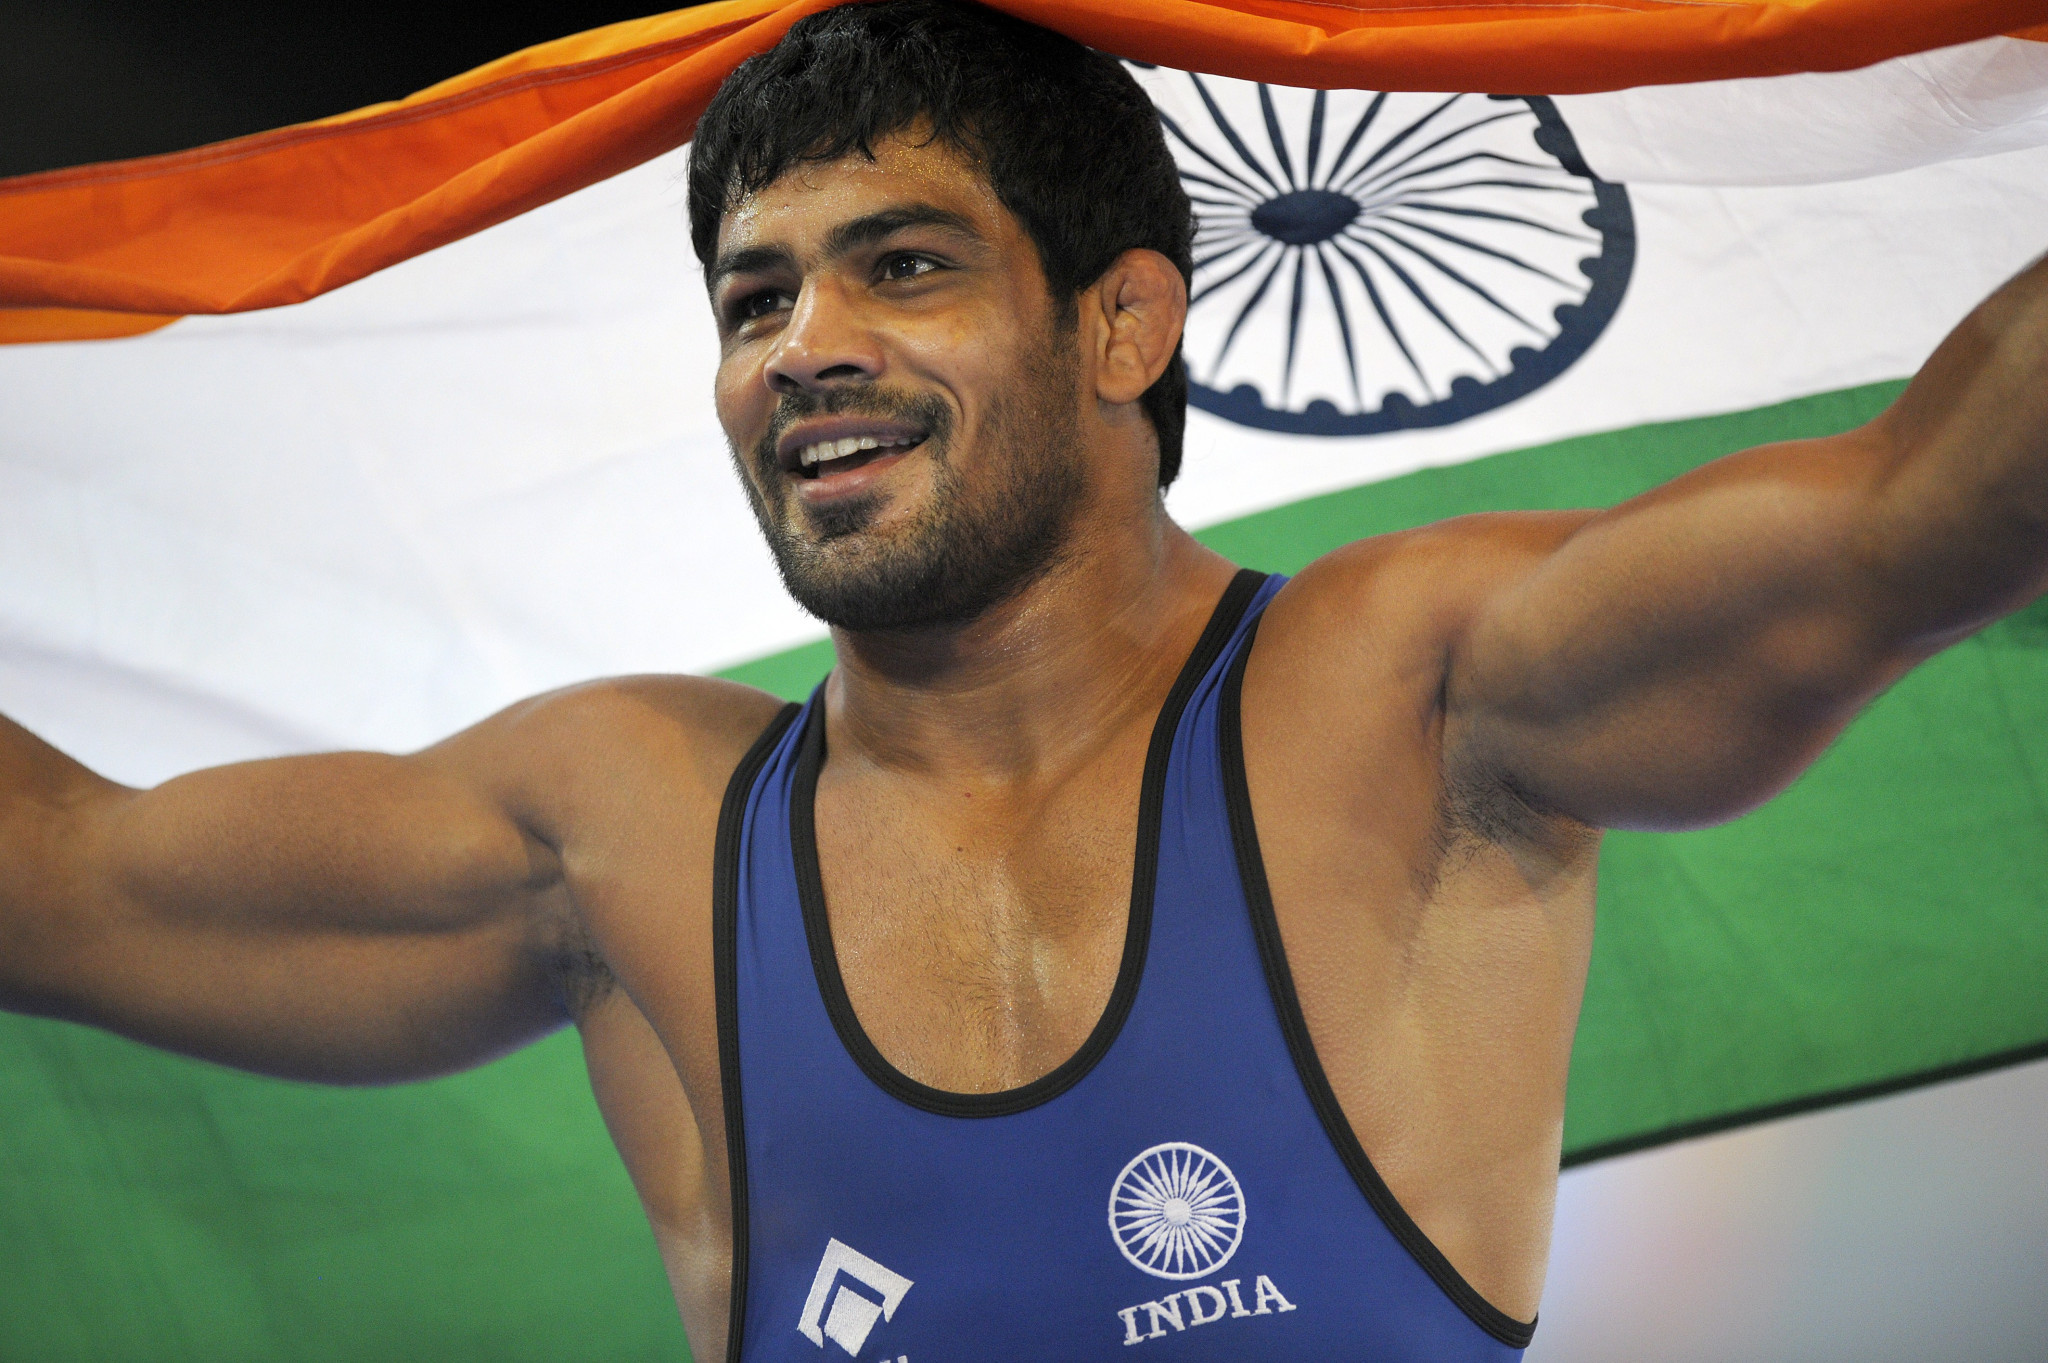 Kumar at risk of Gold Coast 2018 ban for alleged involvement in brawl at Indian wrestling selection trial